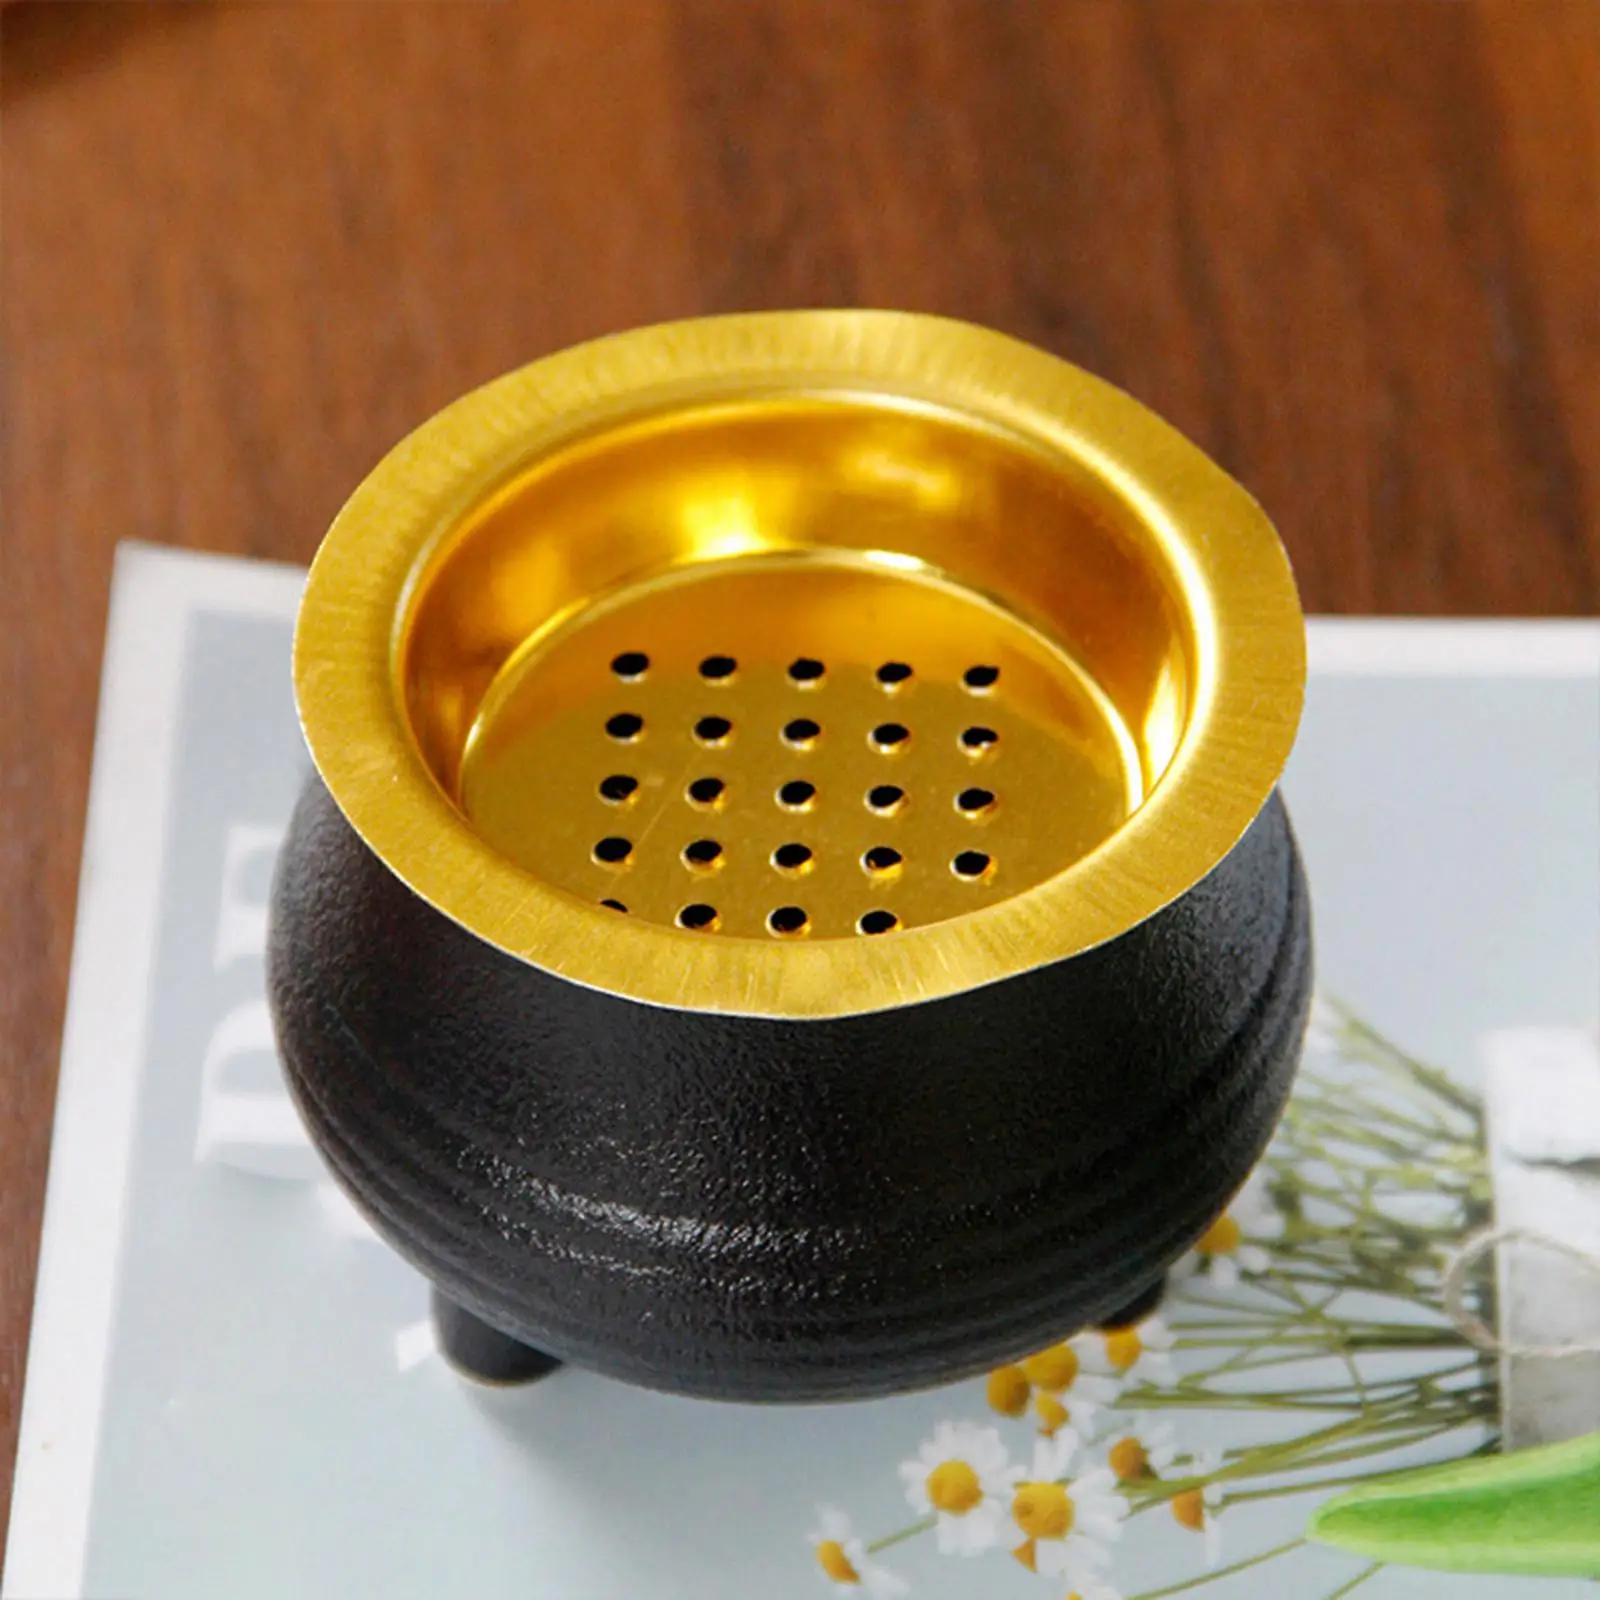 Ceramic Metal Incense Burner Censer Ornament Stand Aromatherapy Fragrance Diffuser for Home SPA Home Decor Housewarming Gift